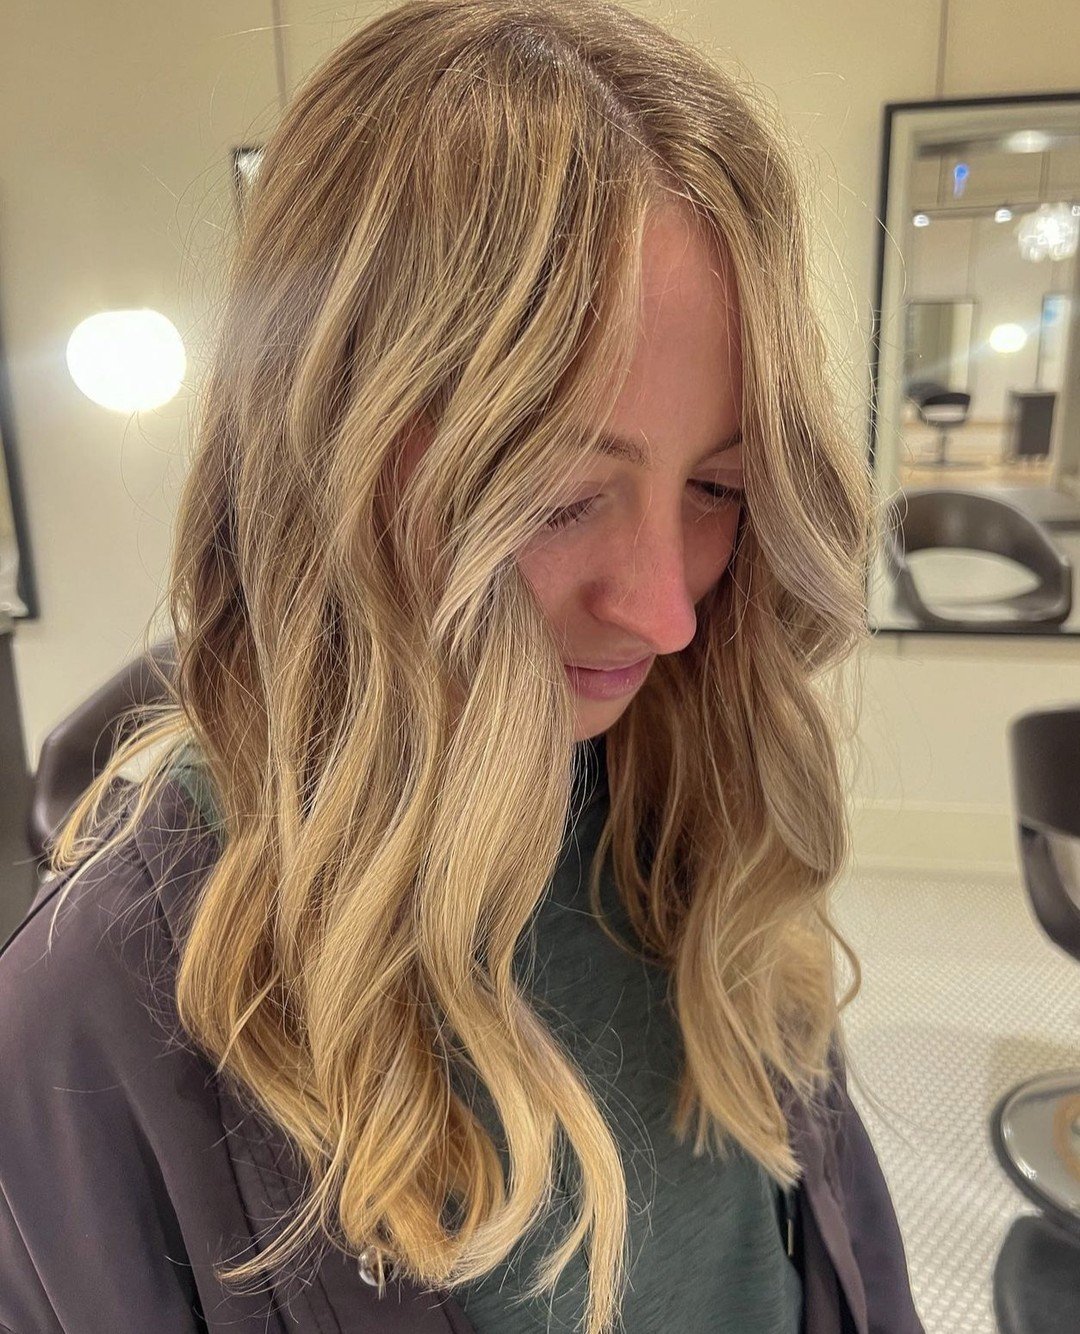 Time to shake things up! Switch up your look at Michael &amp; Michael Salon with a stunning blonde balayage. Trust us, you won't be able to resist those sun-kissed vibes! Color by @colorbyhaley_chicago⁠
⁠
▪️ Book your next consultation/appointment to